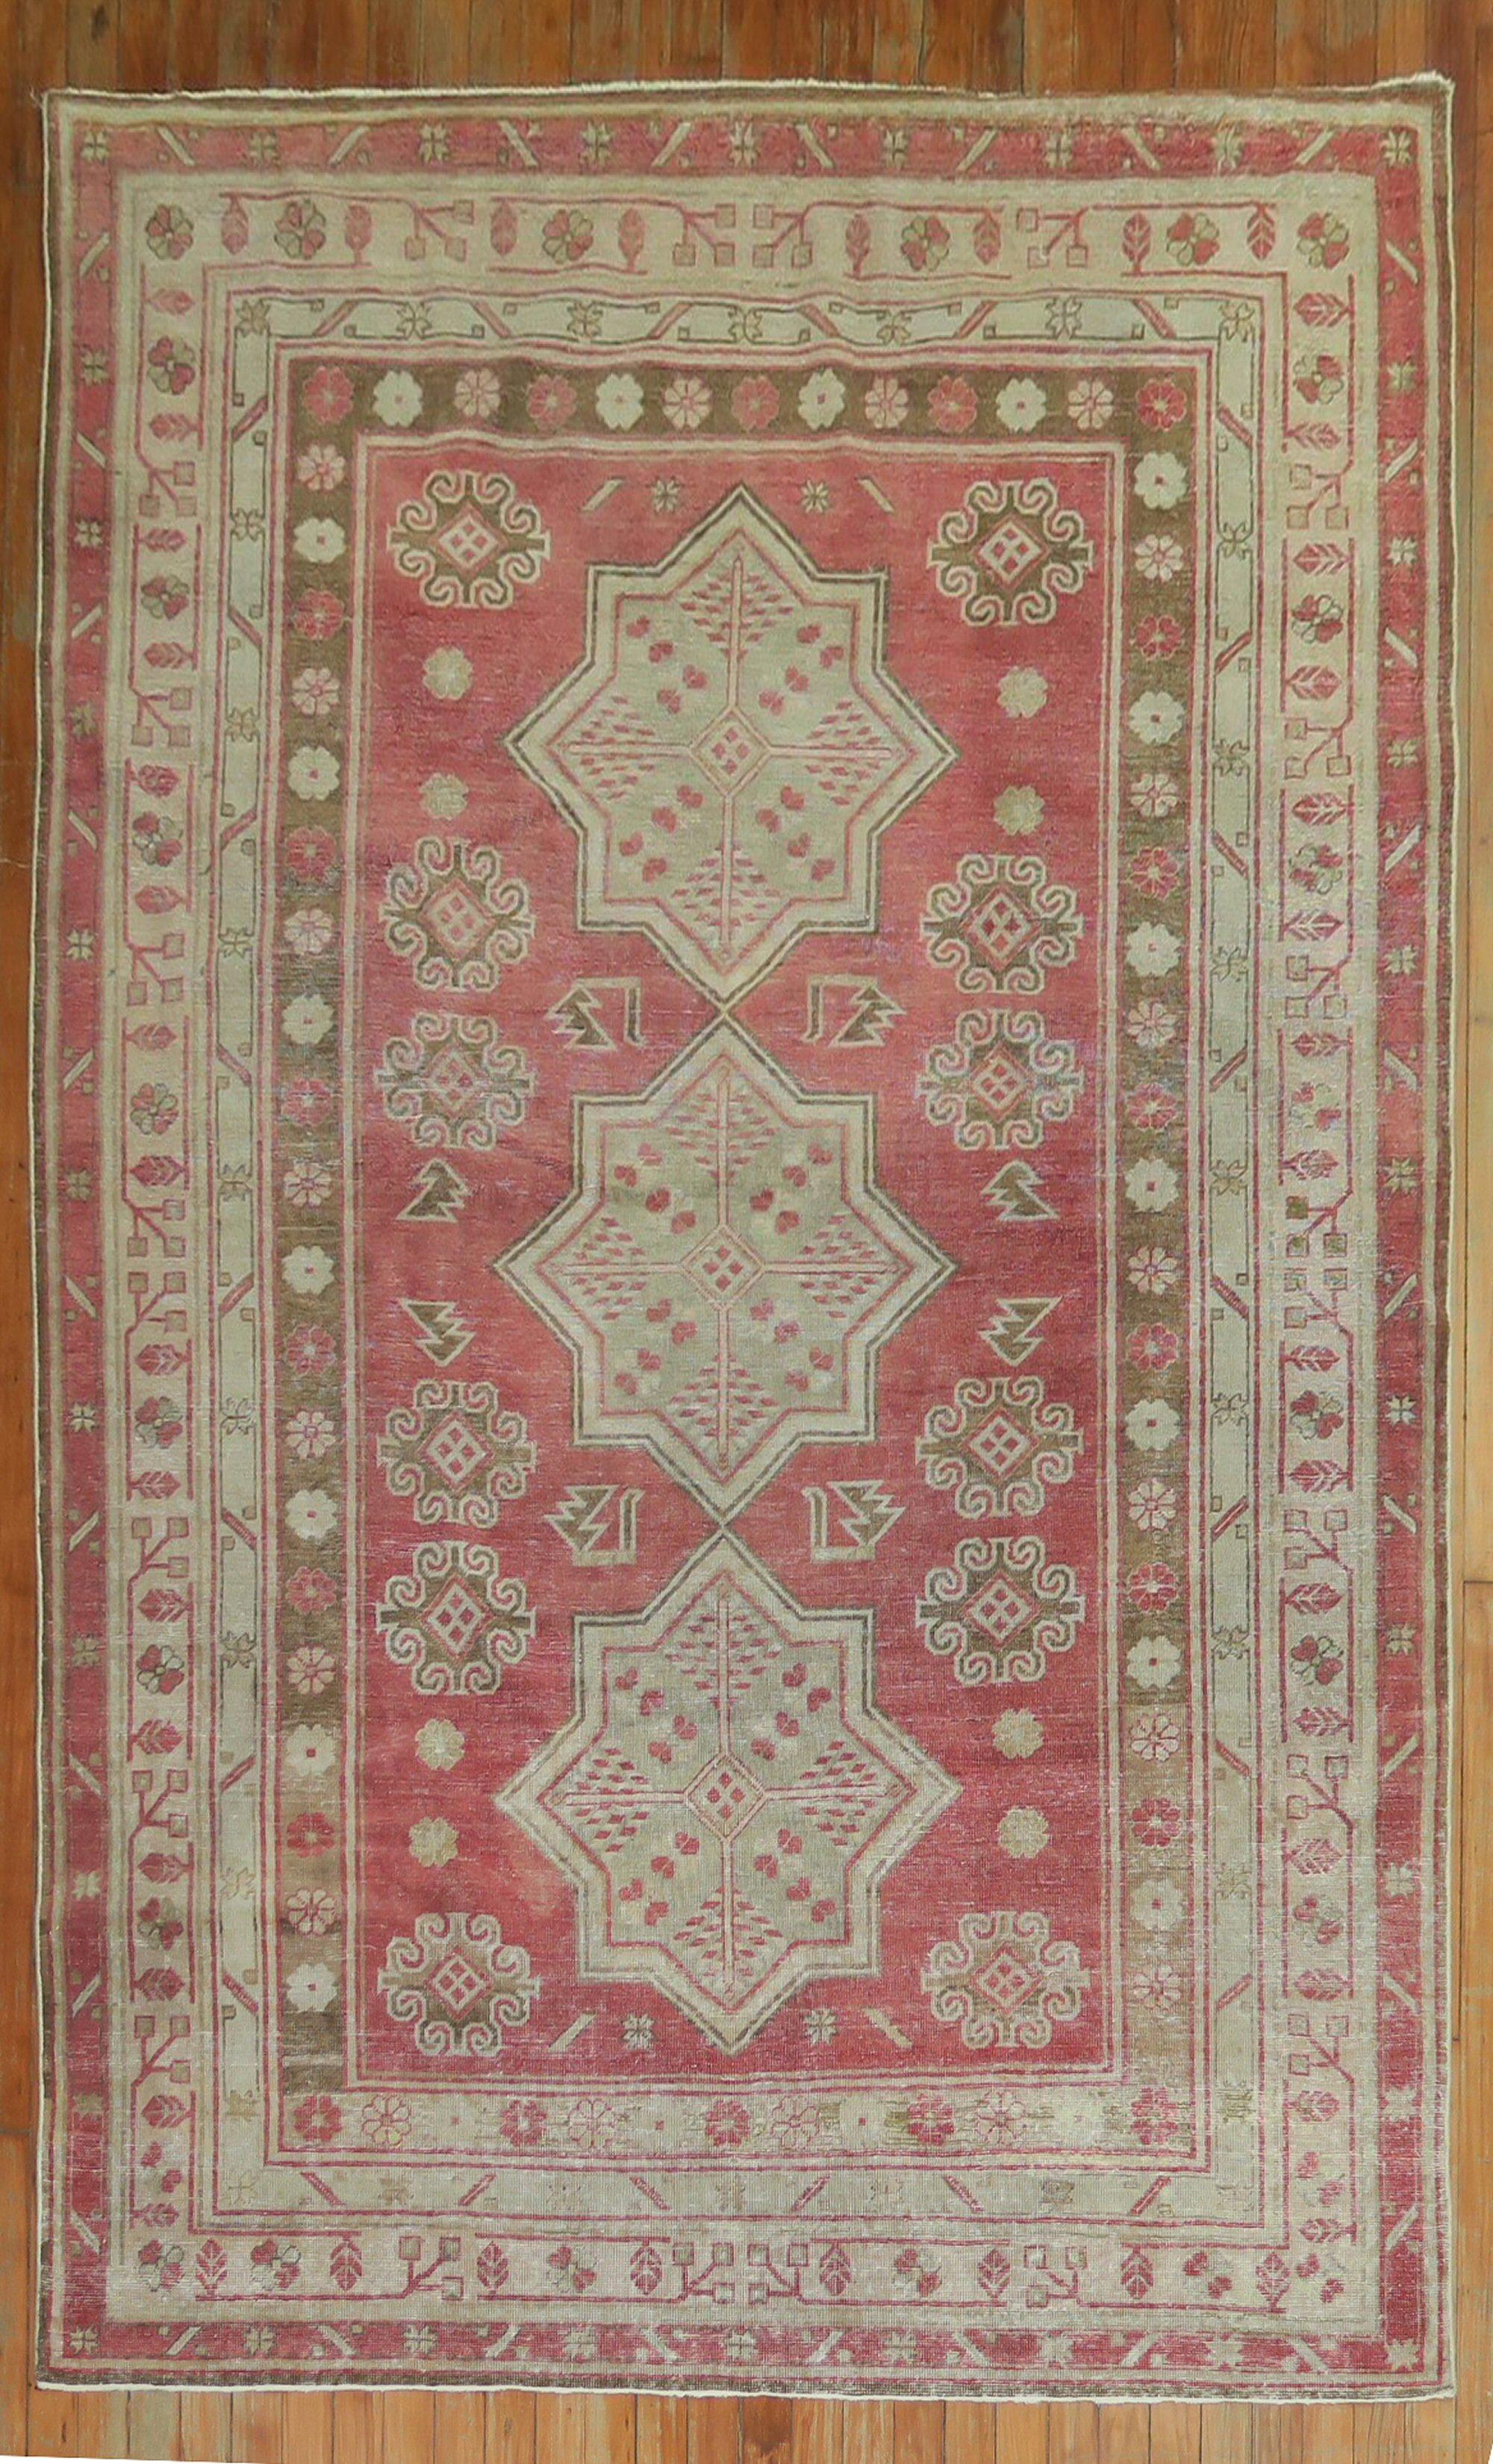 An early 20th century Crimson Red background Samarkand rug, predominant accents in gray-green and brown

Measures: 5'4'' x 8'5''.